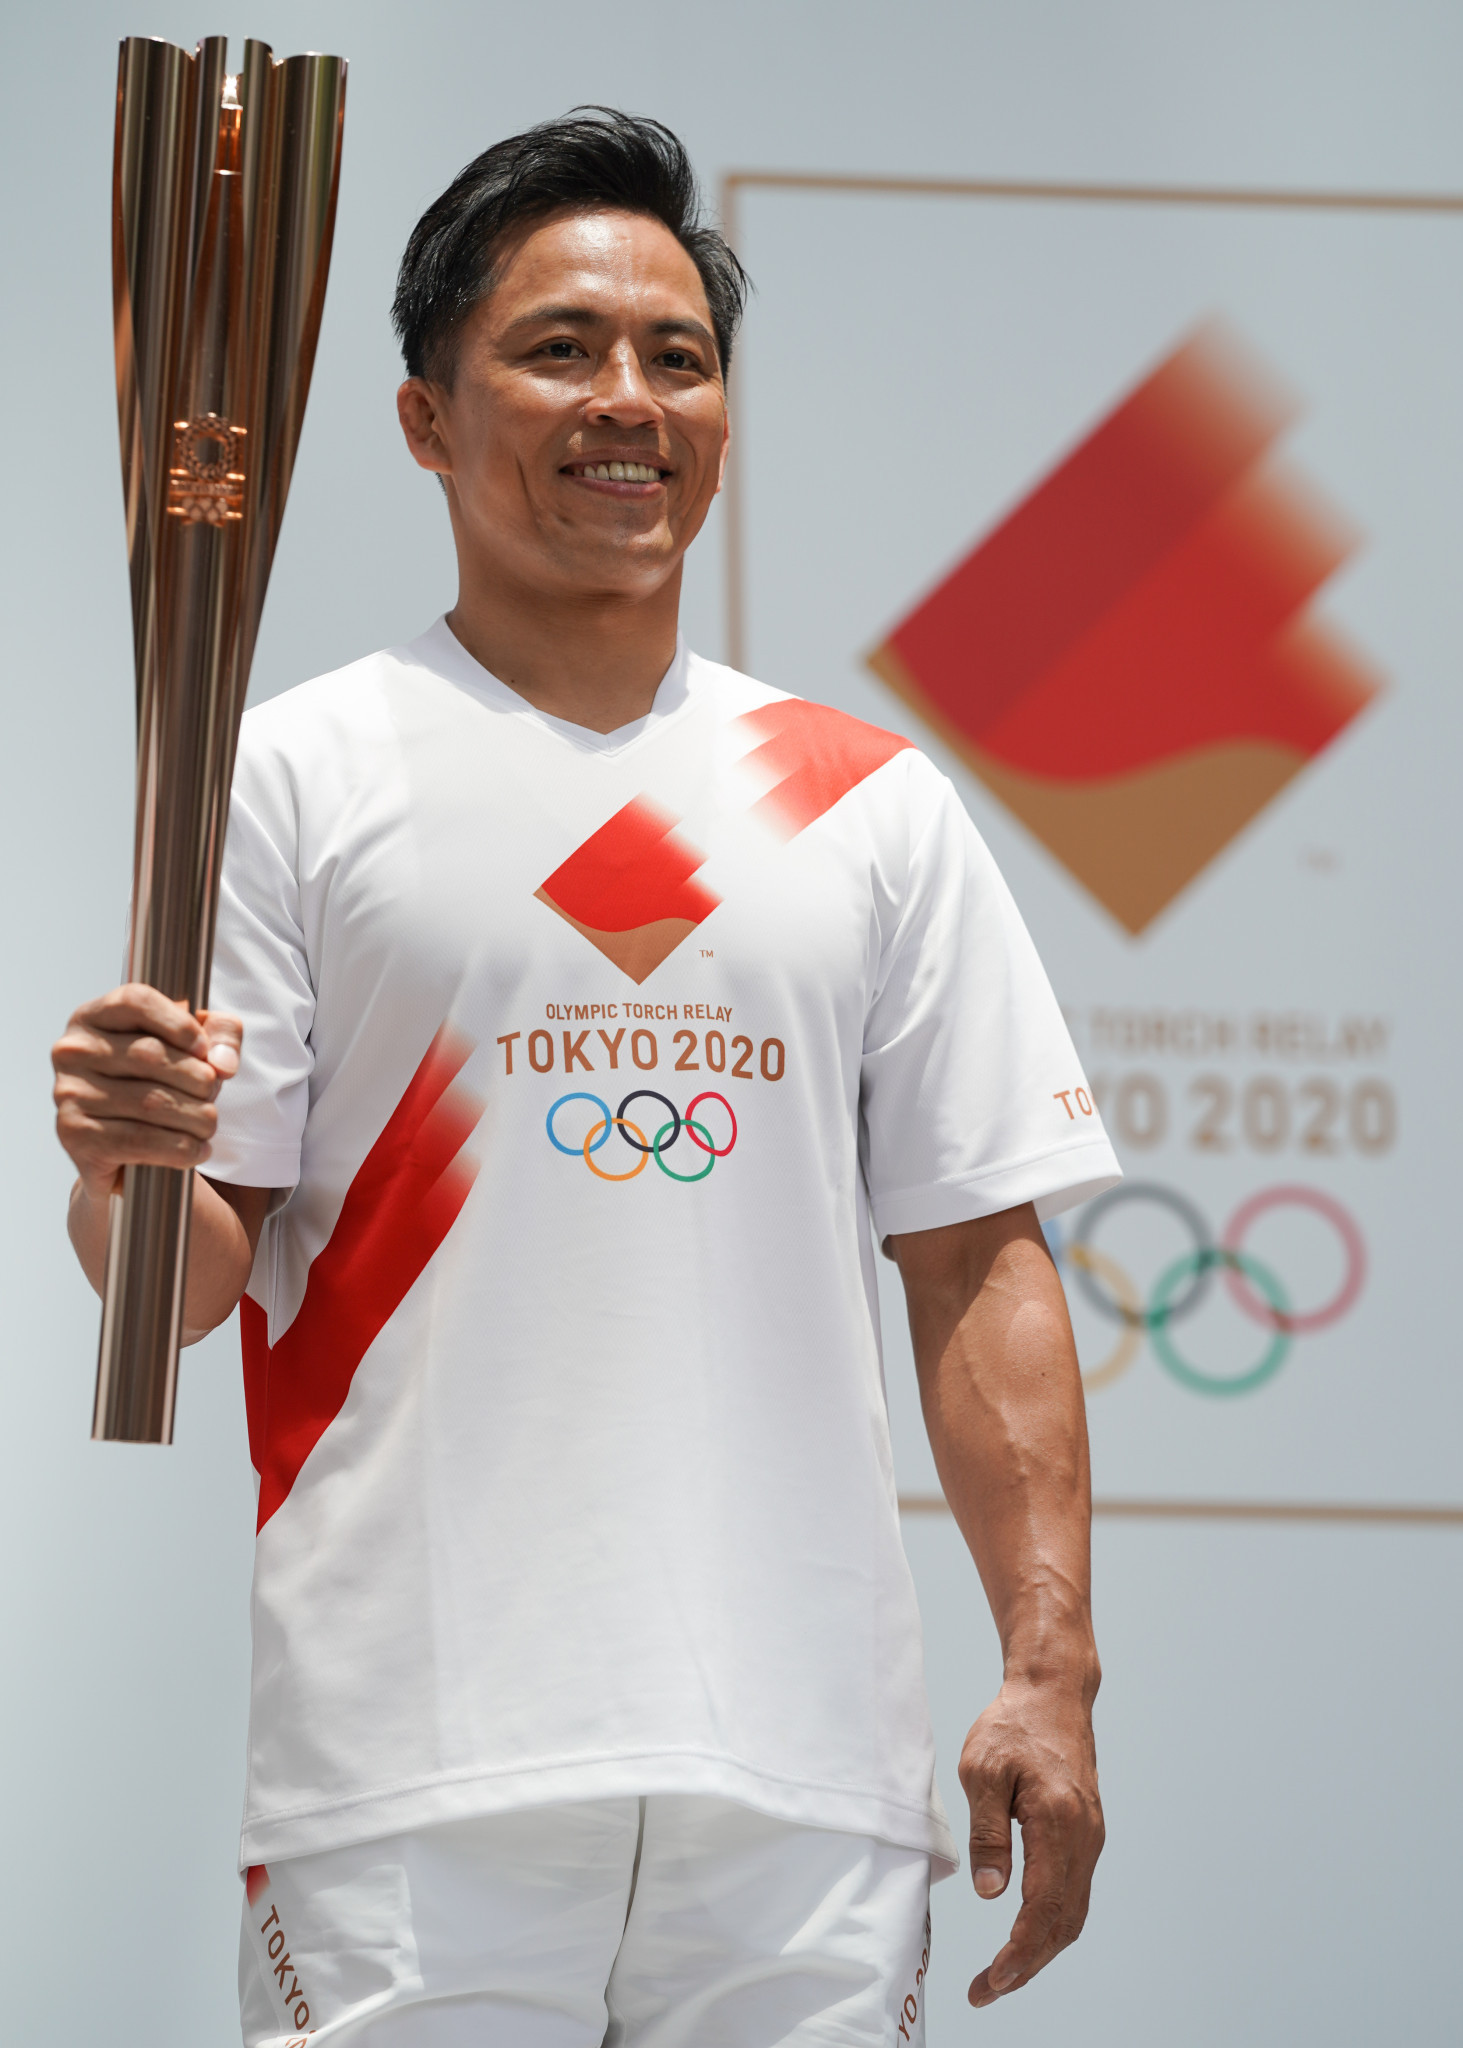 Japan's three-times Olympic judo champion Tadahiro Nomura is an ambassador for the Tokyo 2020 Torch Relay, and was also on the selection panel to choose the best design for next year's medals ©Getty Images